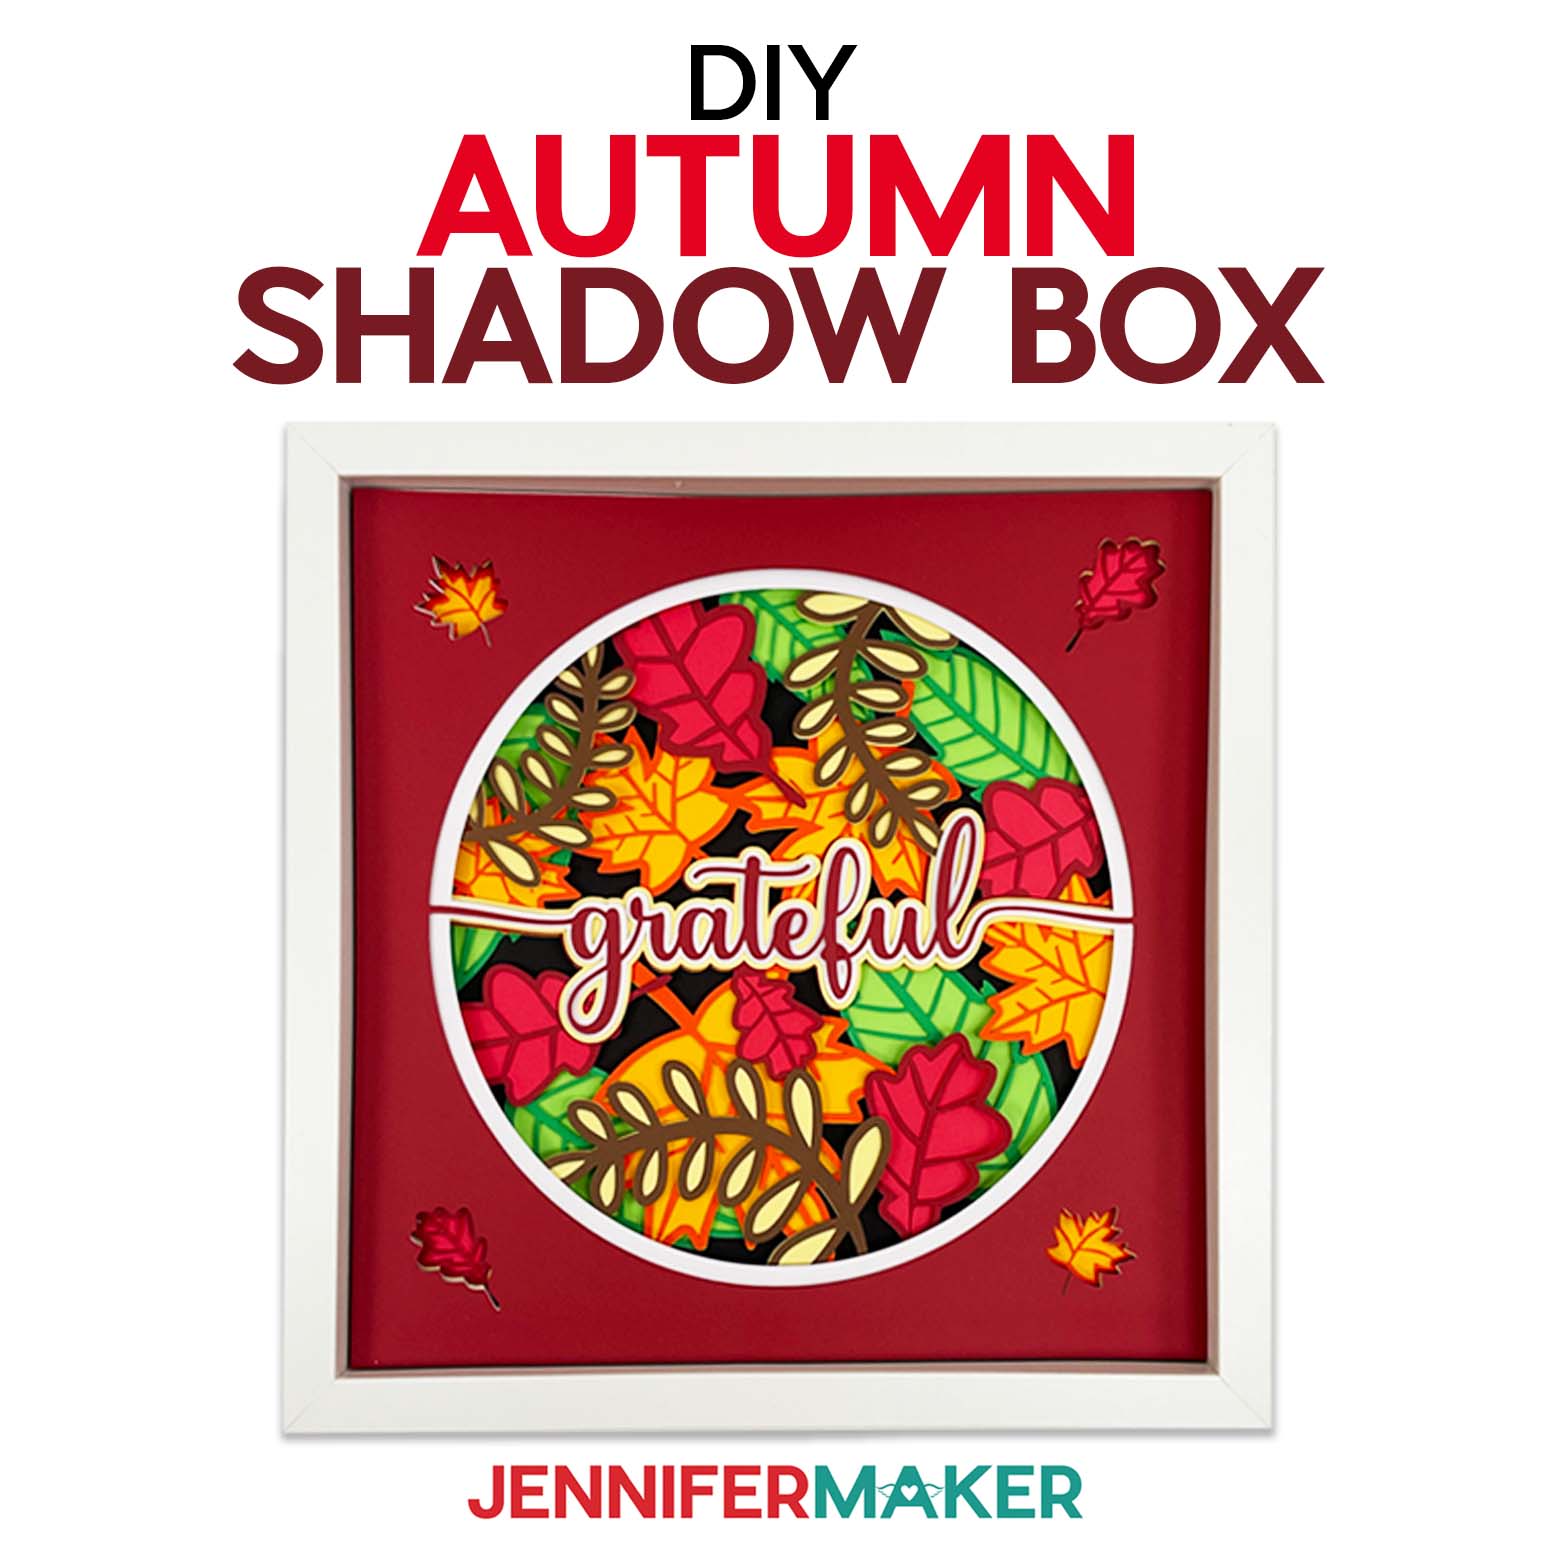 Winter Shadow Boxes: Cozy Up with Lights and Photos! - Jennifer Maker